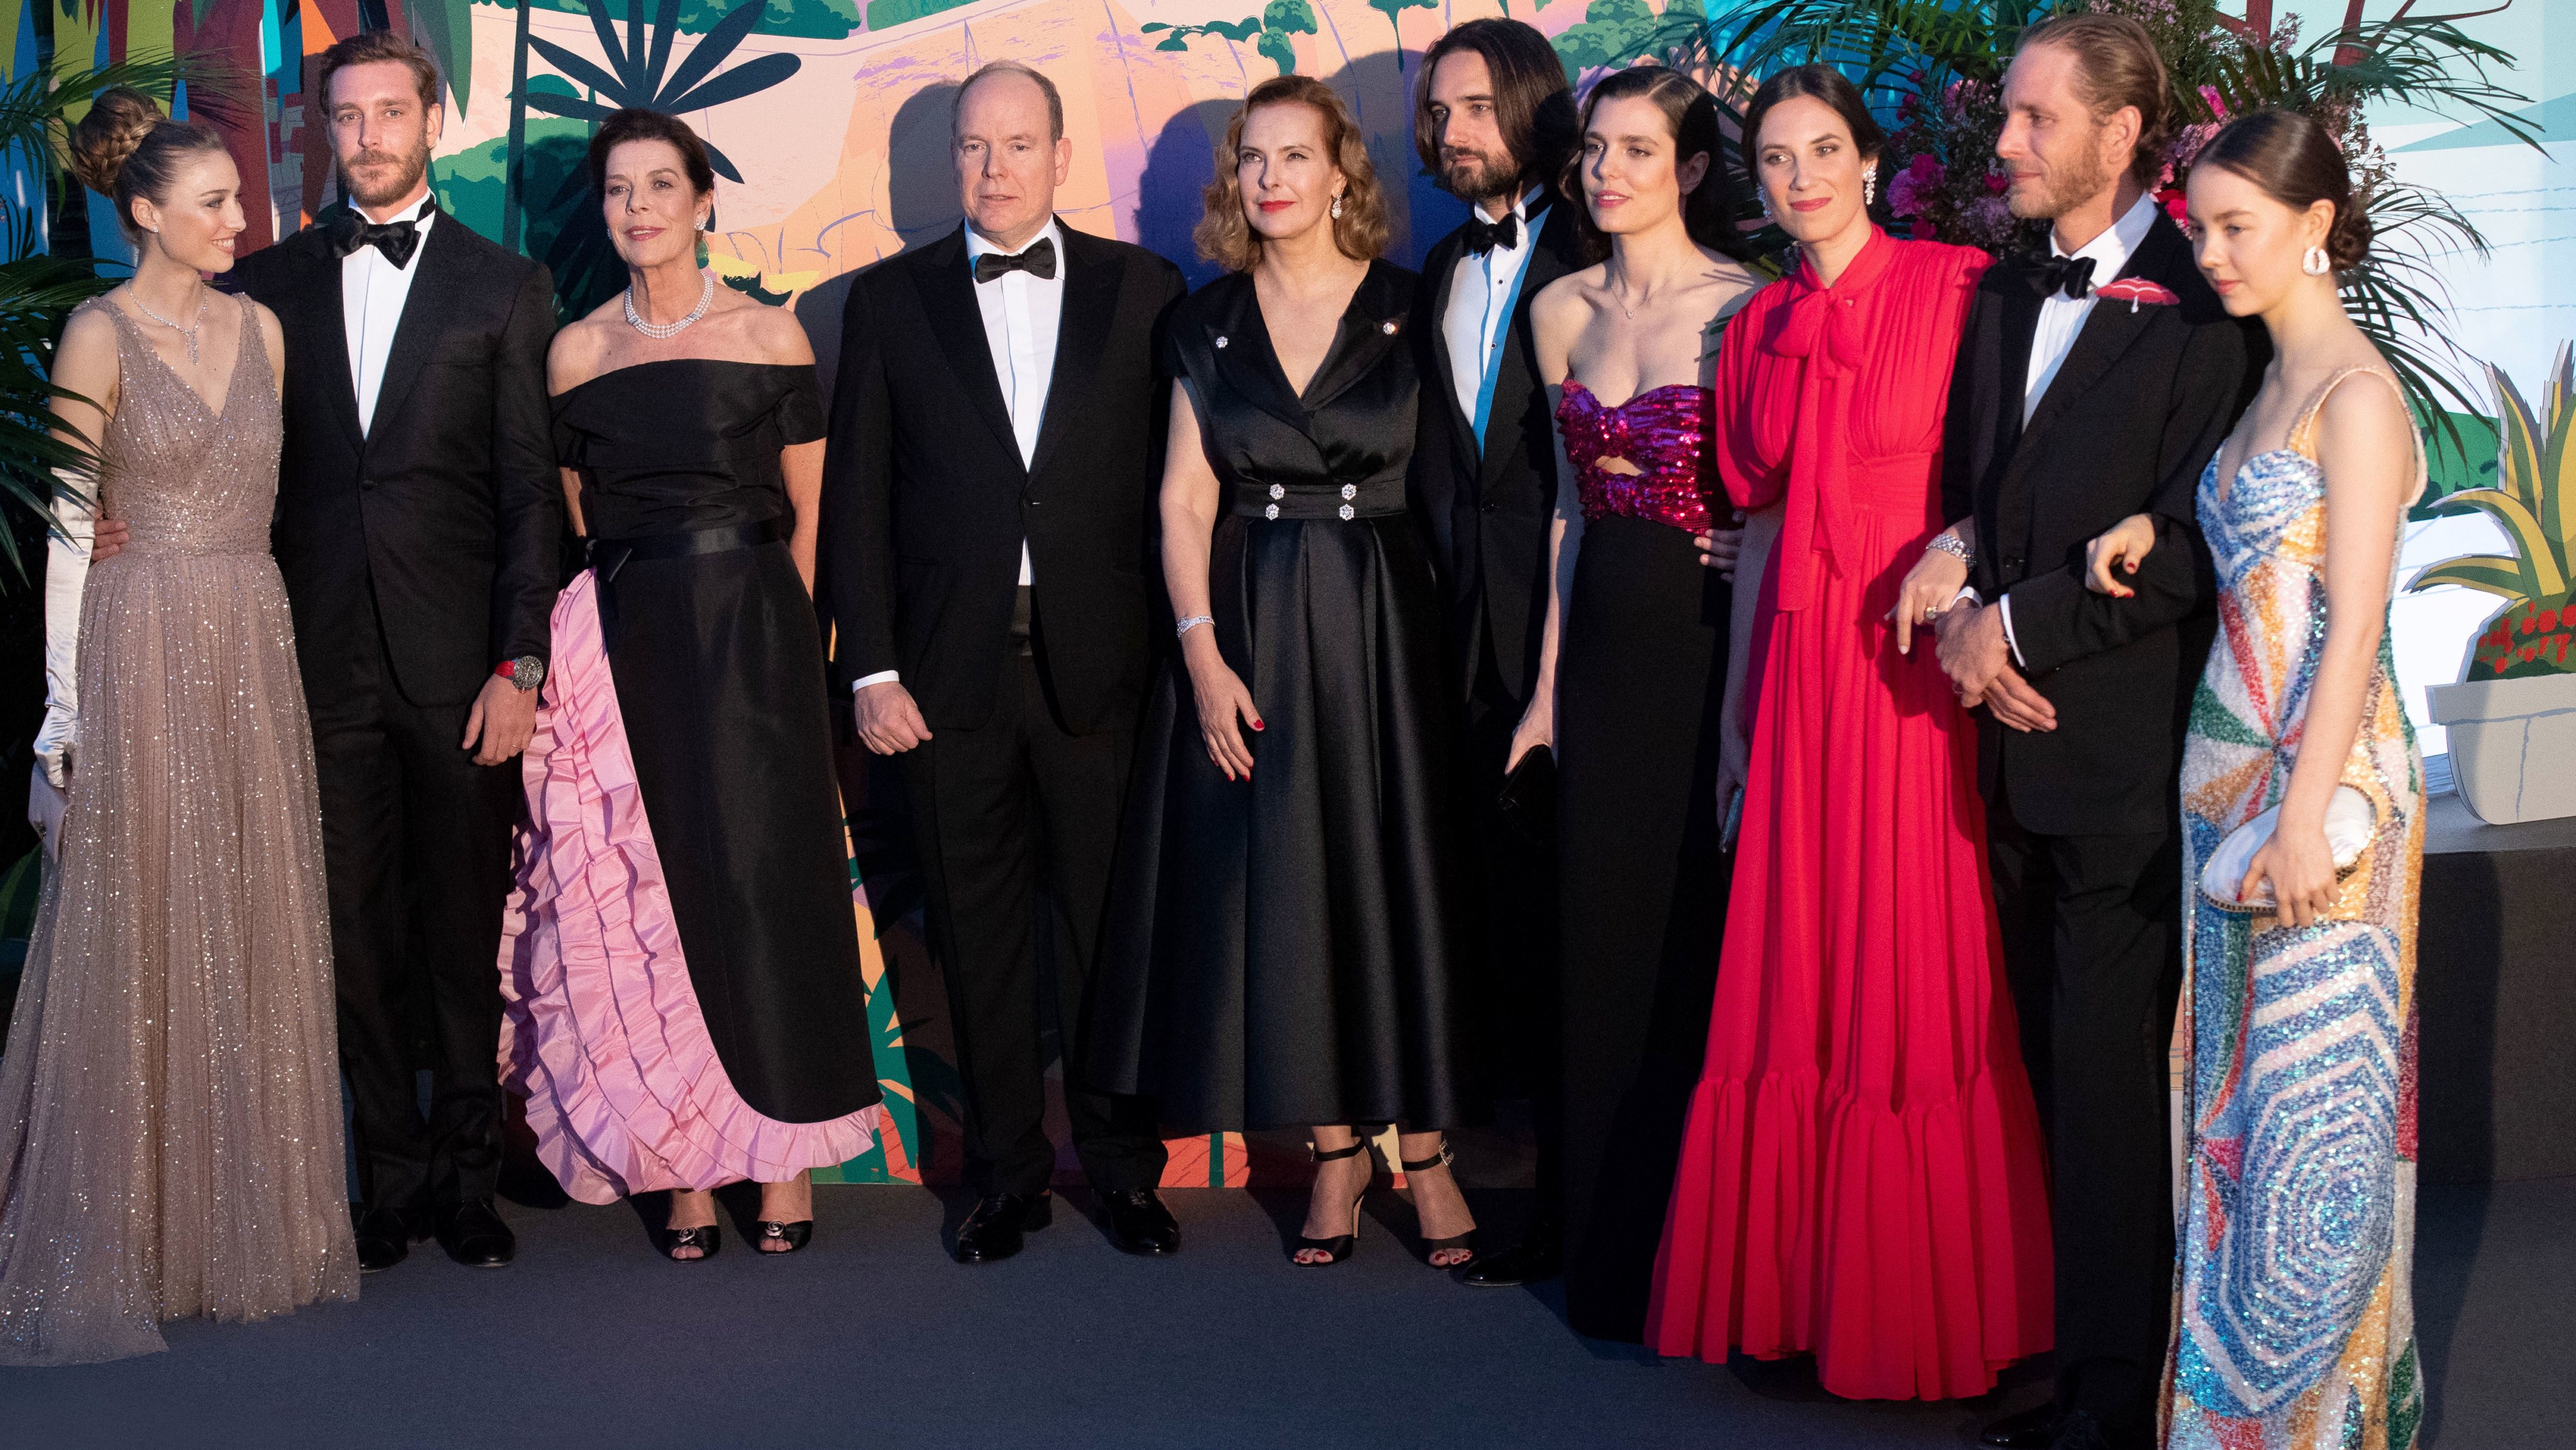 Rose Ball 2019 To Benefit The Princess Grace Foundation In Monaco